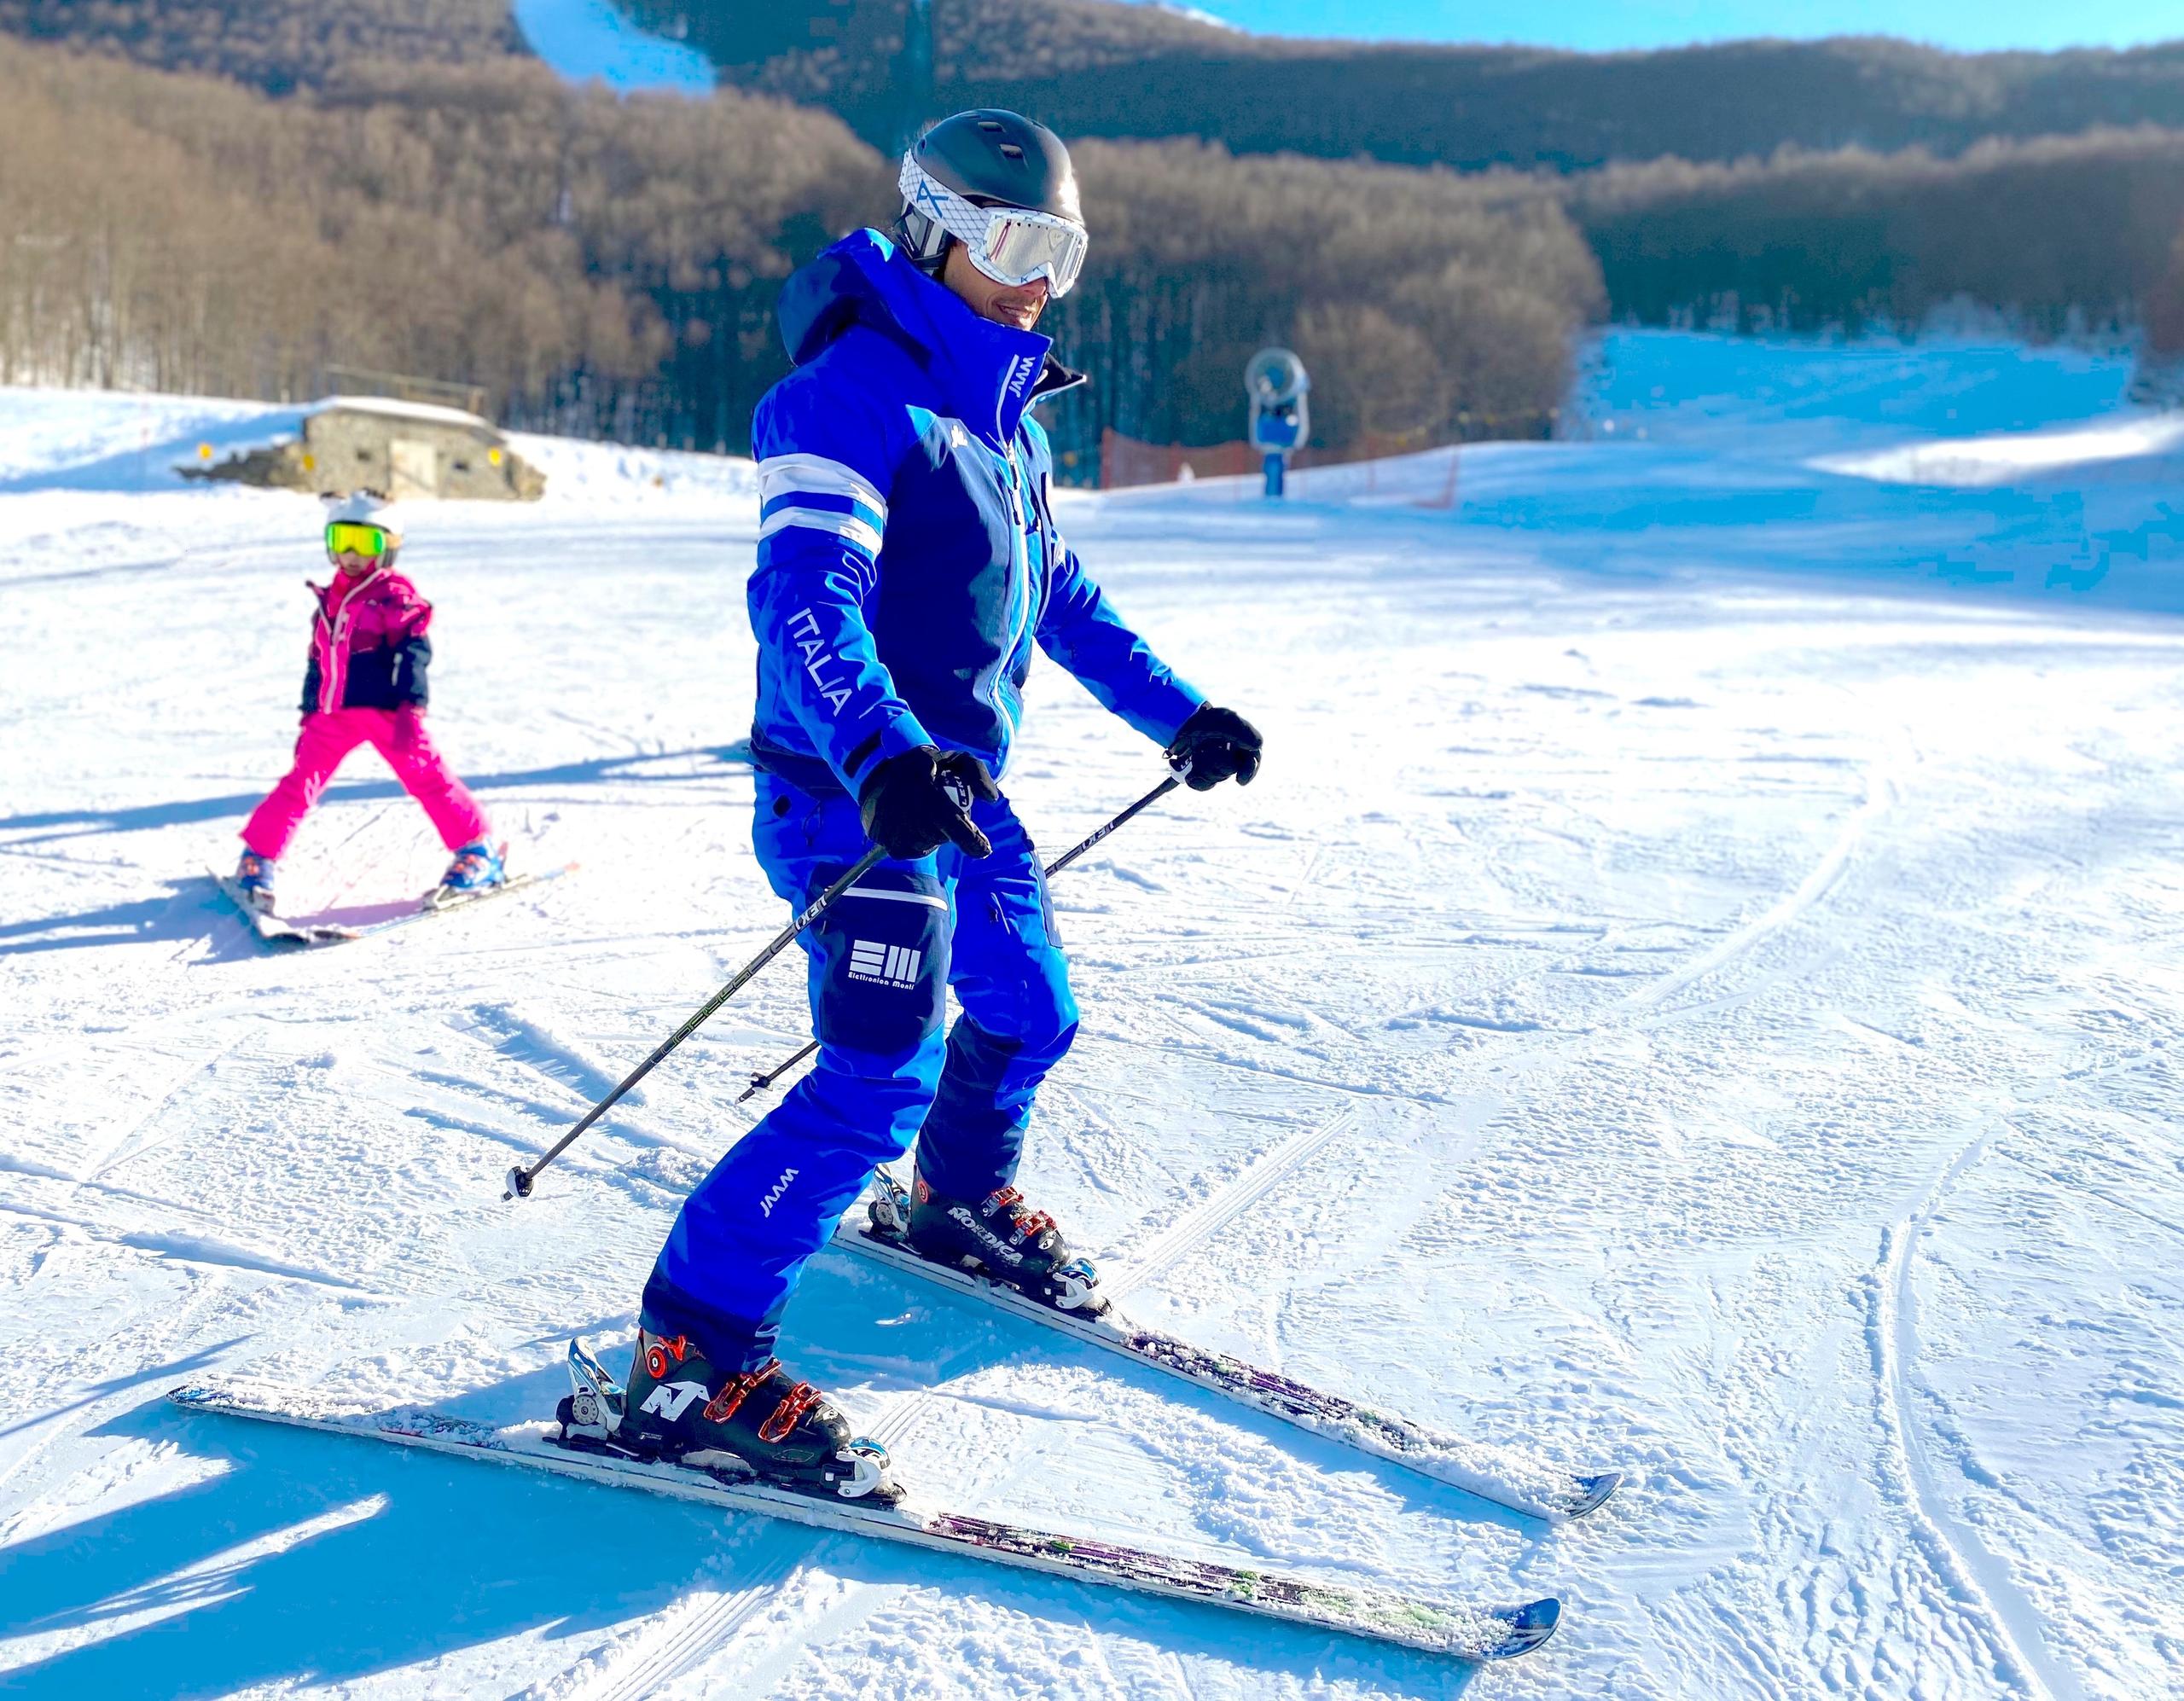 Italian Skiing Instructor with the Elettronica Monti Logo on his ski suit